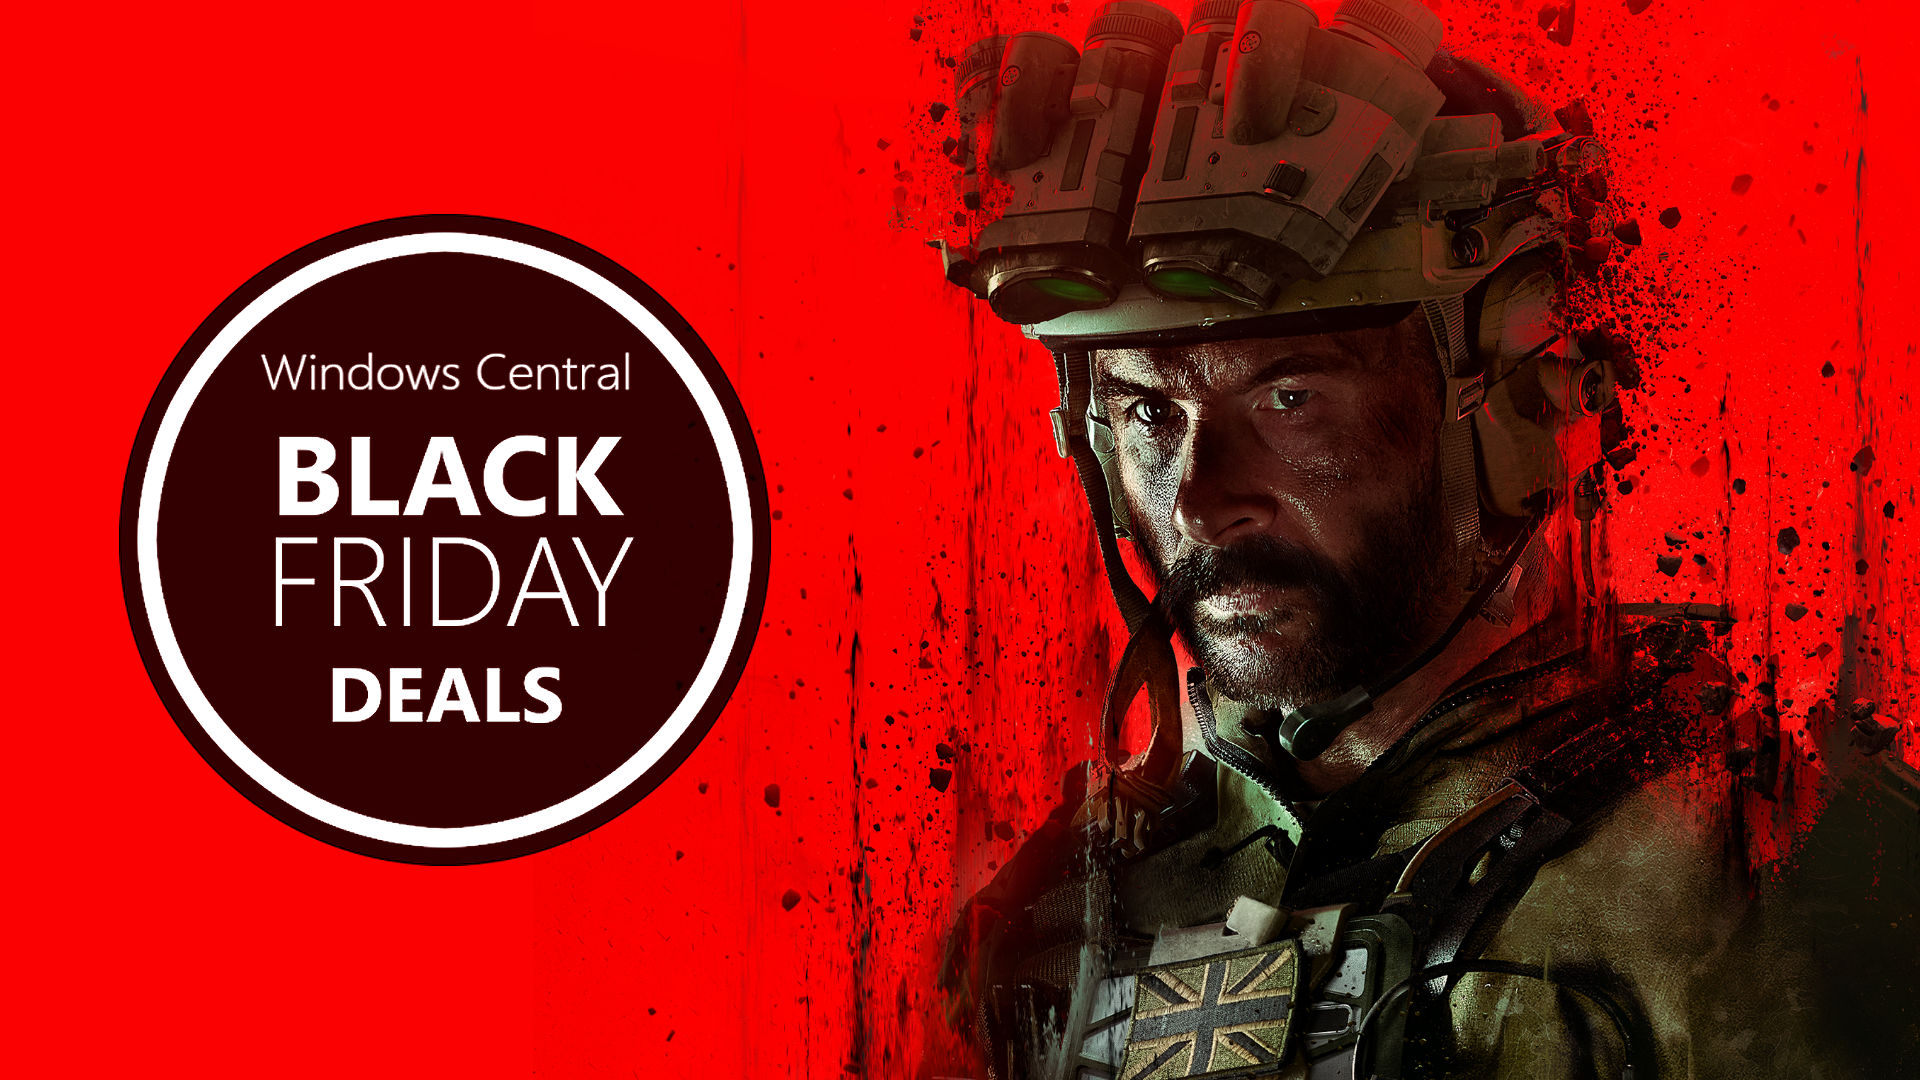 Save big on this Call of Duty Modern Warfare 3 PS5 bundle ahead of Black  Friday